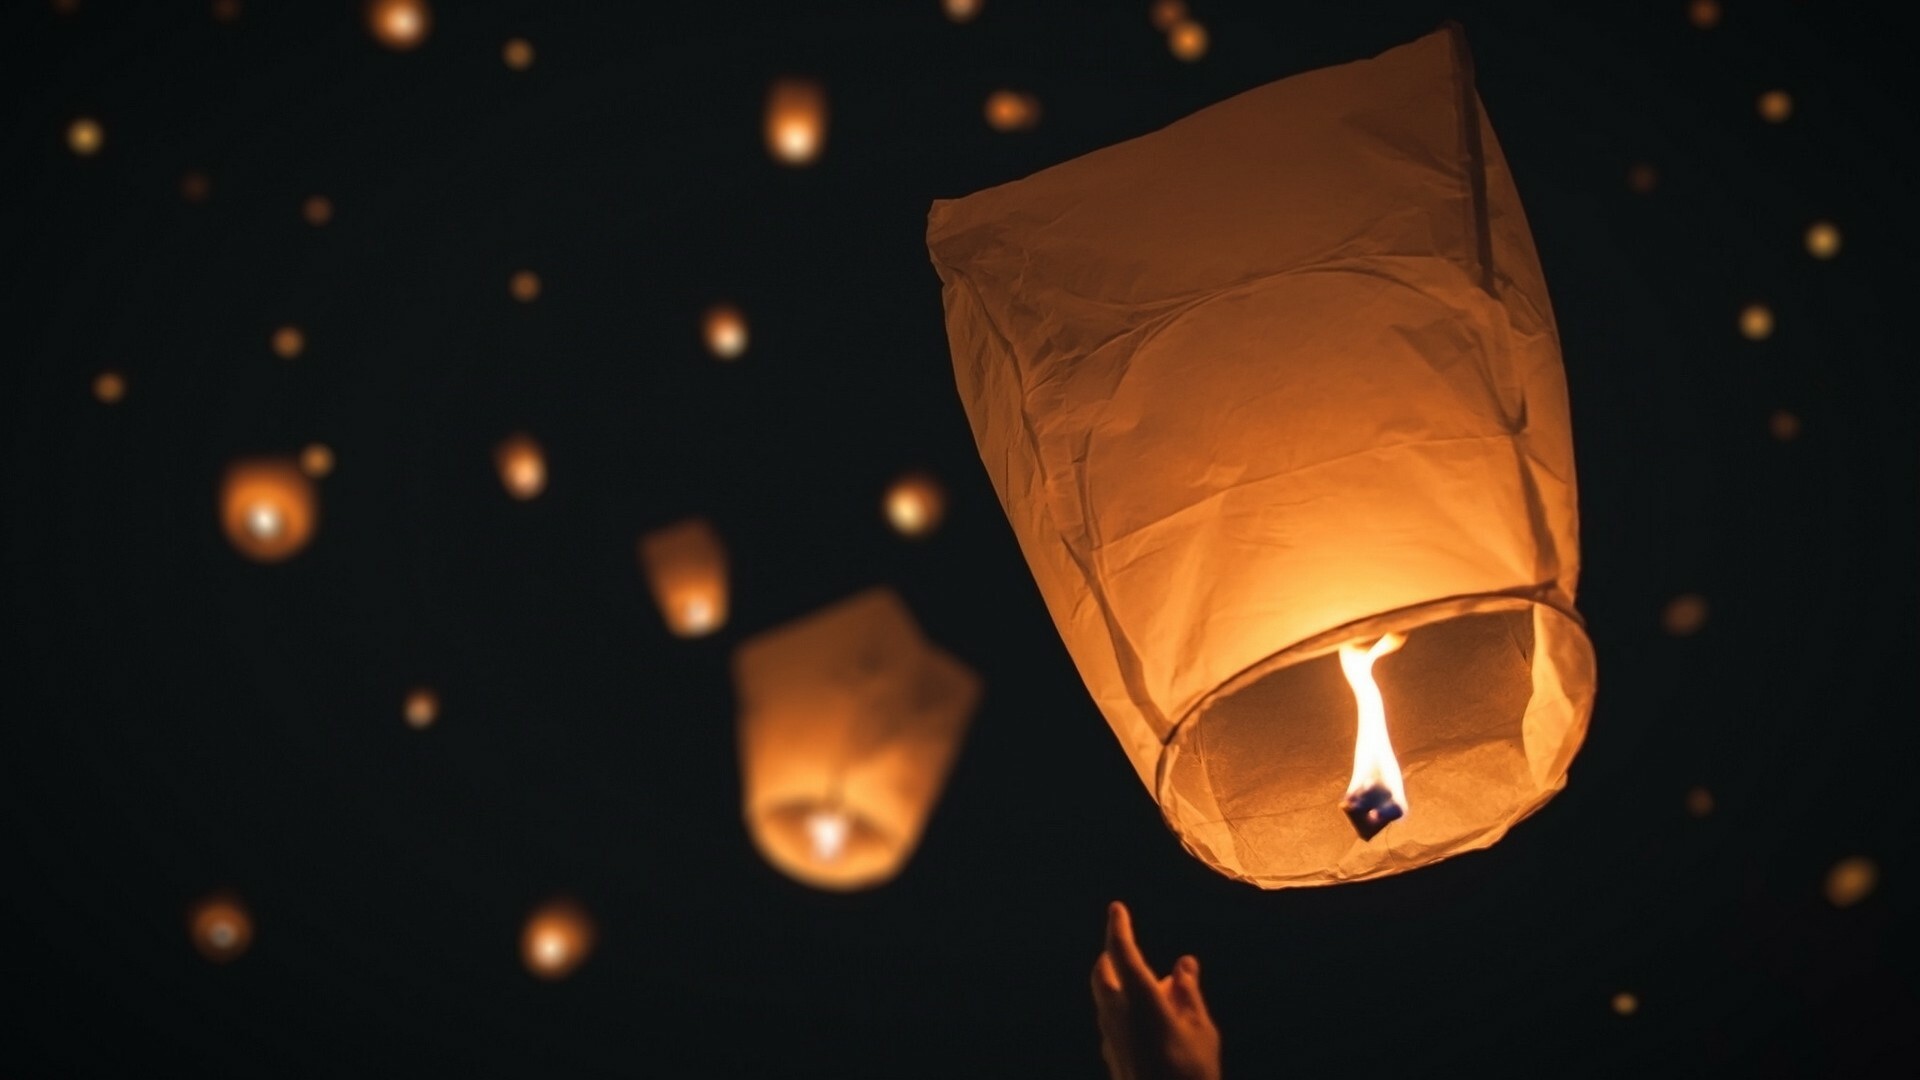 Lantern Festival: Balloon, made of a thin square frame with a few bamboo skewers holding the sides together. 1920x1080 Full HD Background.